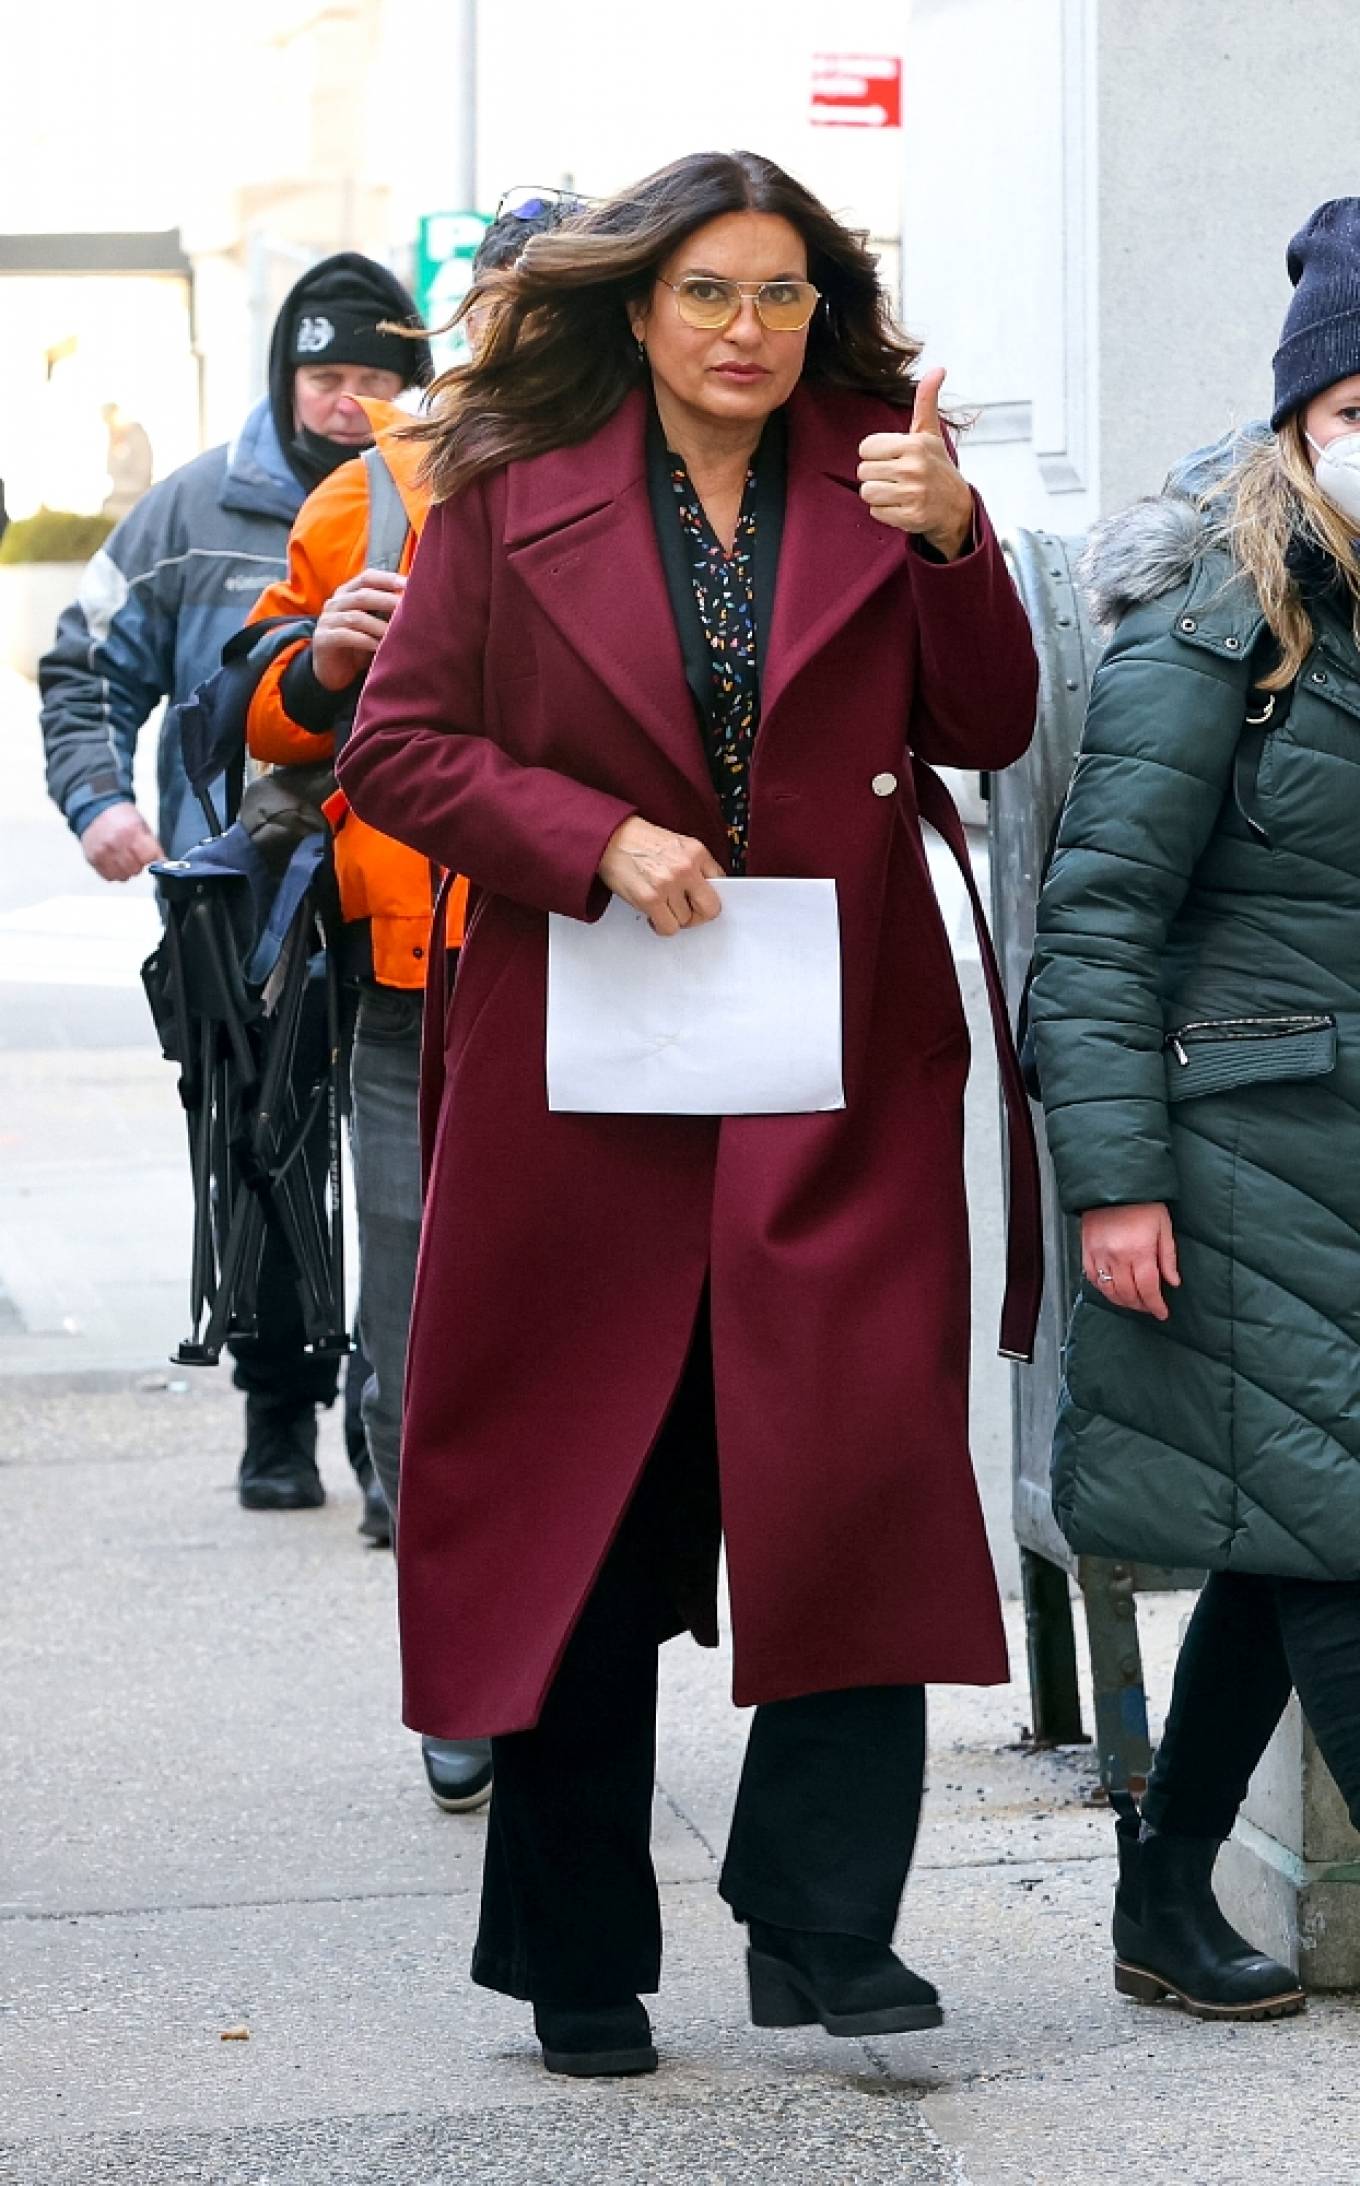 Mariska Hargitay - On the set of the 'Law and Order Special Victims Unit' in New York